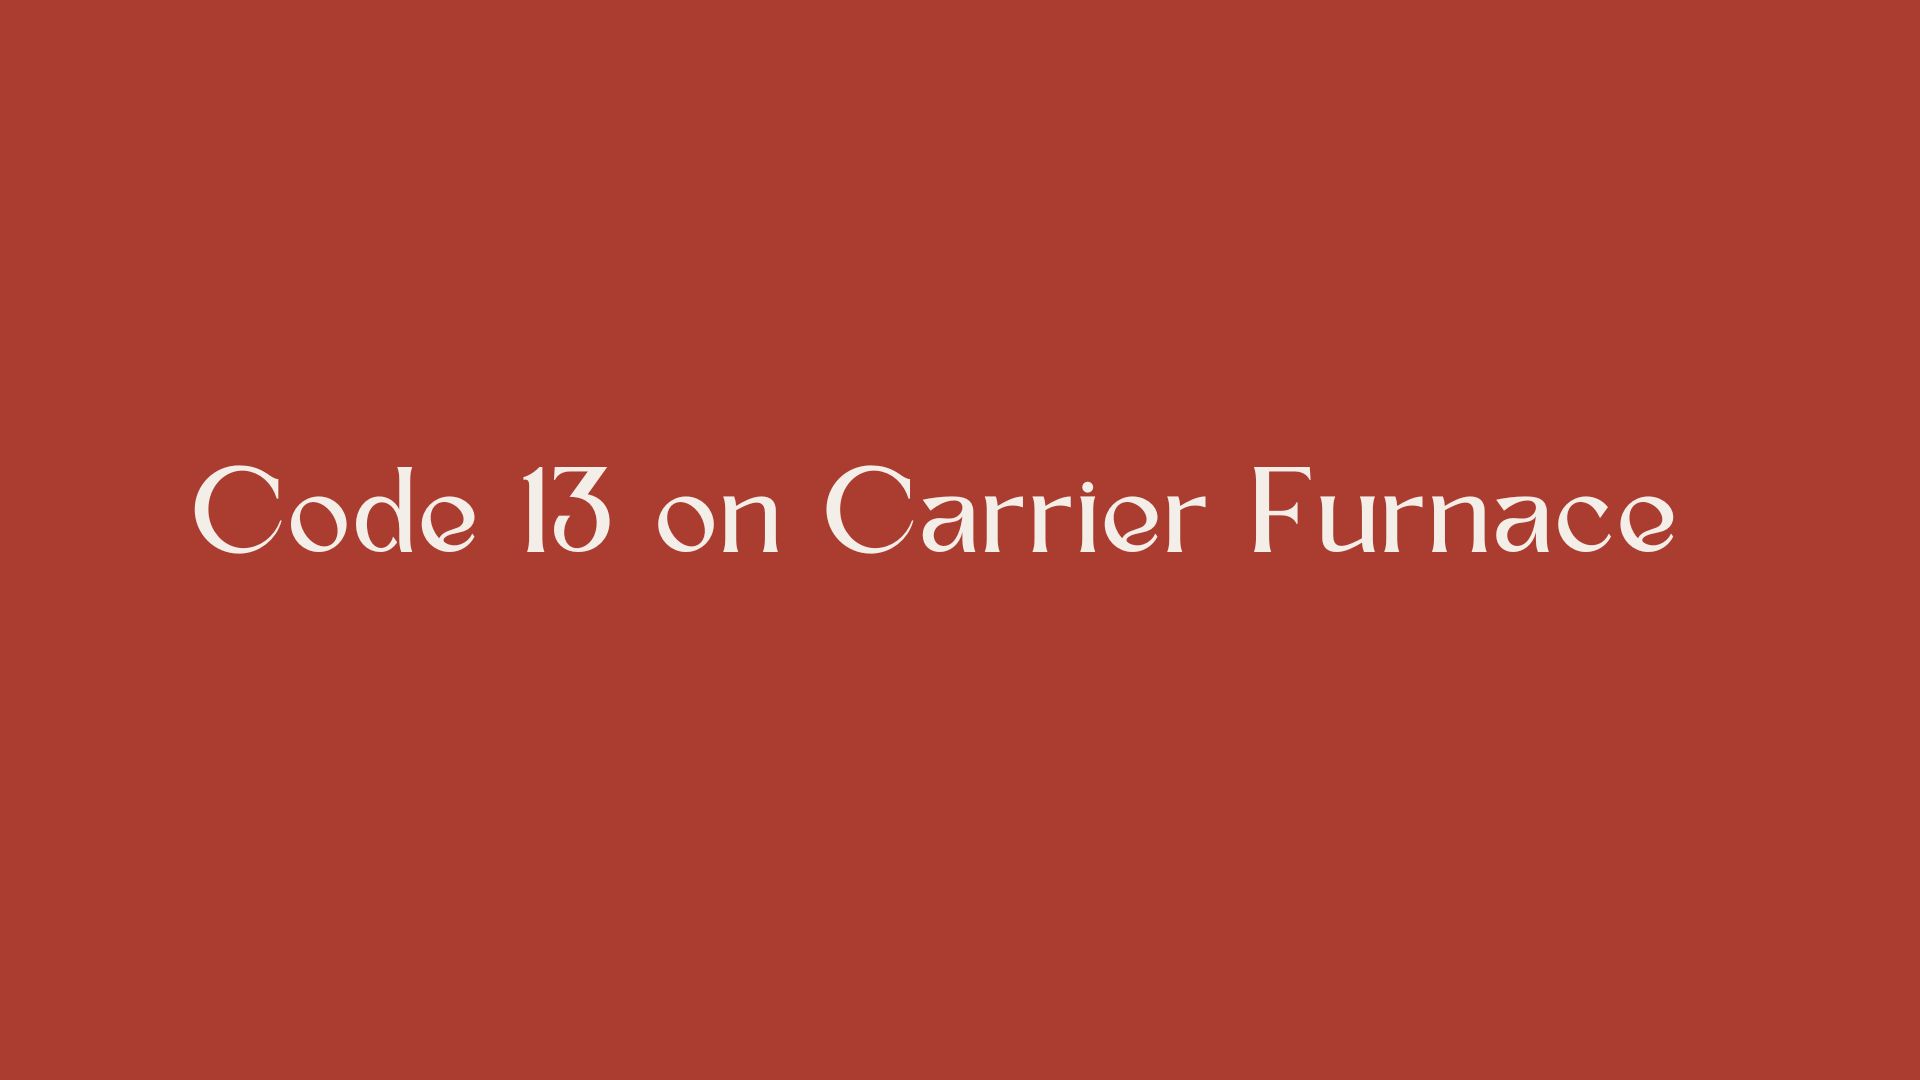 Code 13 on Carrier Furnace